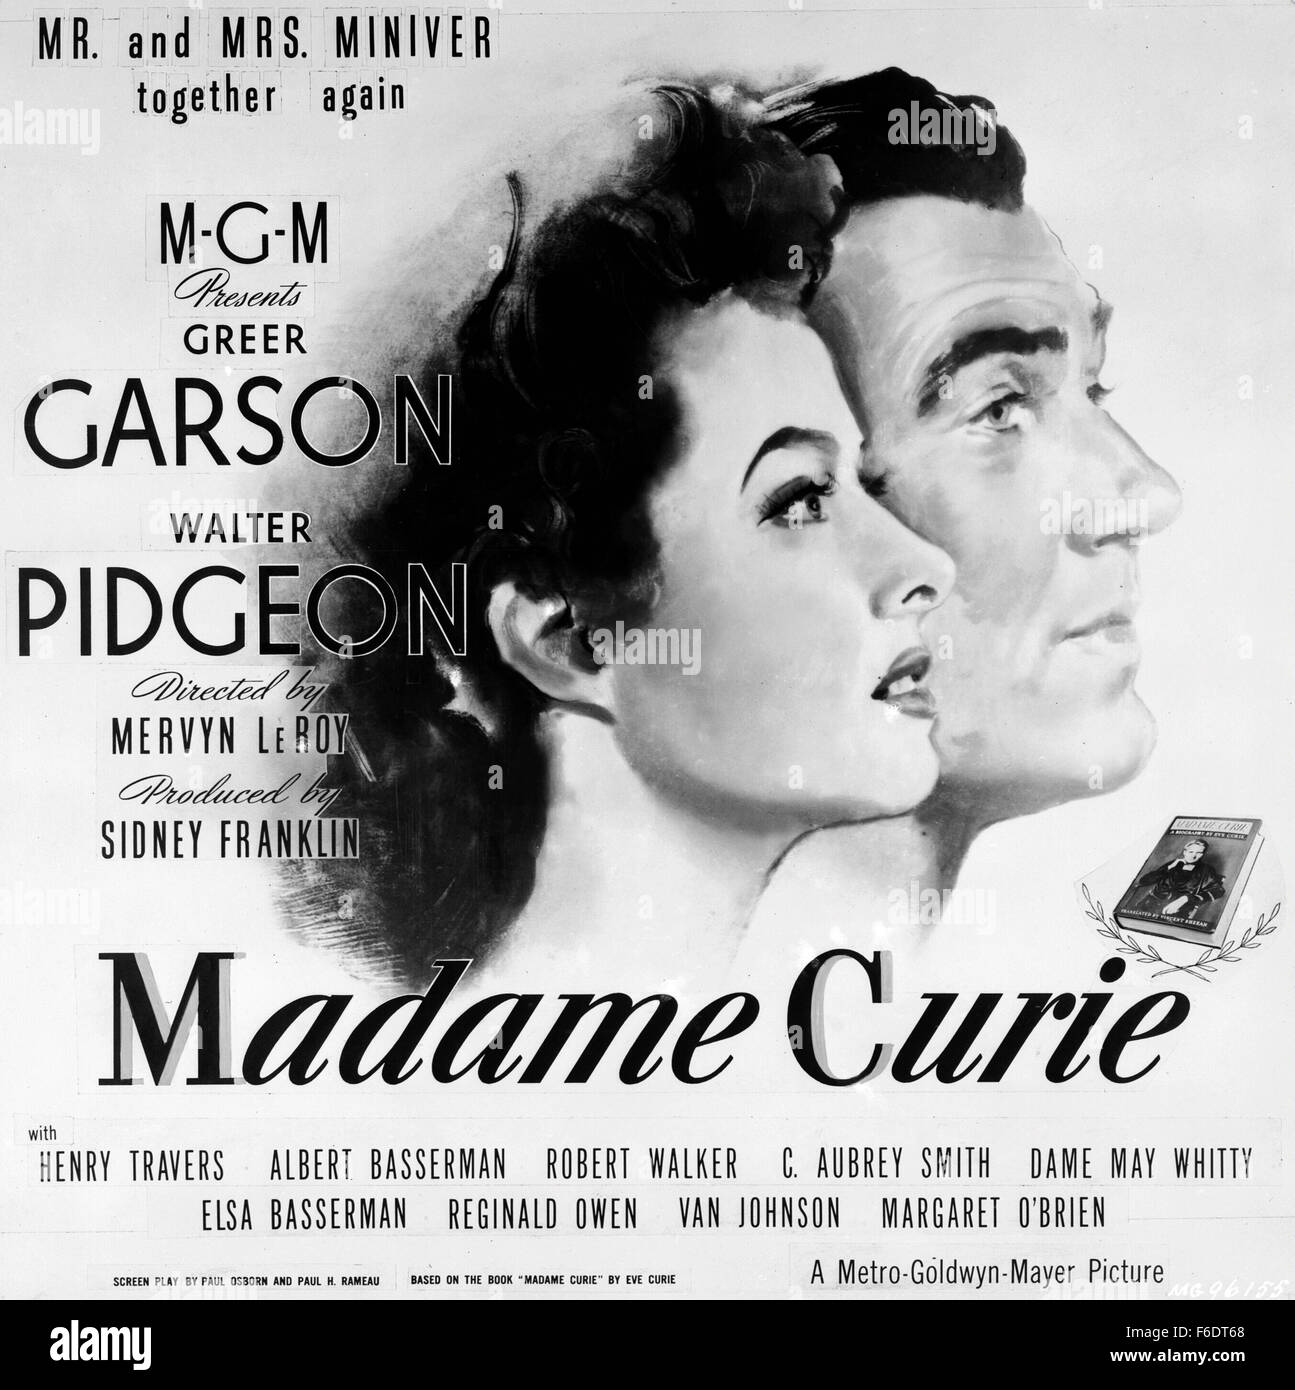 RELEASE DATE: December 15, 1943. MOVIE TITLE: Madame Curie. STUDIO: Metro-Goldwyn-Mayer (MGM). PLOT: Young Polish physics student Marie marries Doctor Pierre Curie, in whose lab she had worked for a while. On their honeymoon they decide to find out what caused the strange effect Prof. Becquerel has noticed with the uranium/thorium stones for her dissertation. After many experiments they find out that there must be more radioactive elements than uranium and thorium, and they try to isolate it. After years of experiments in a makeshift lab at the University, they are able to isolate a few grains Stock Photo